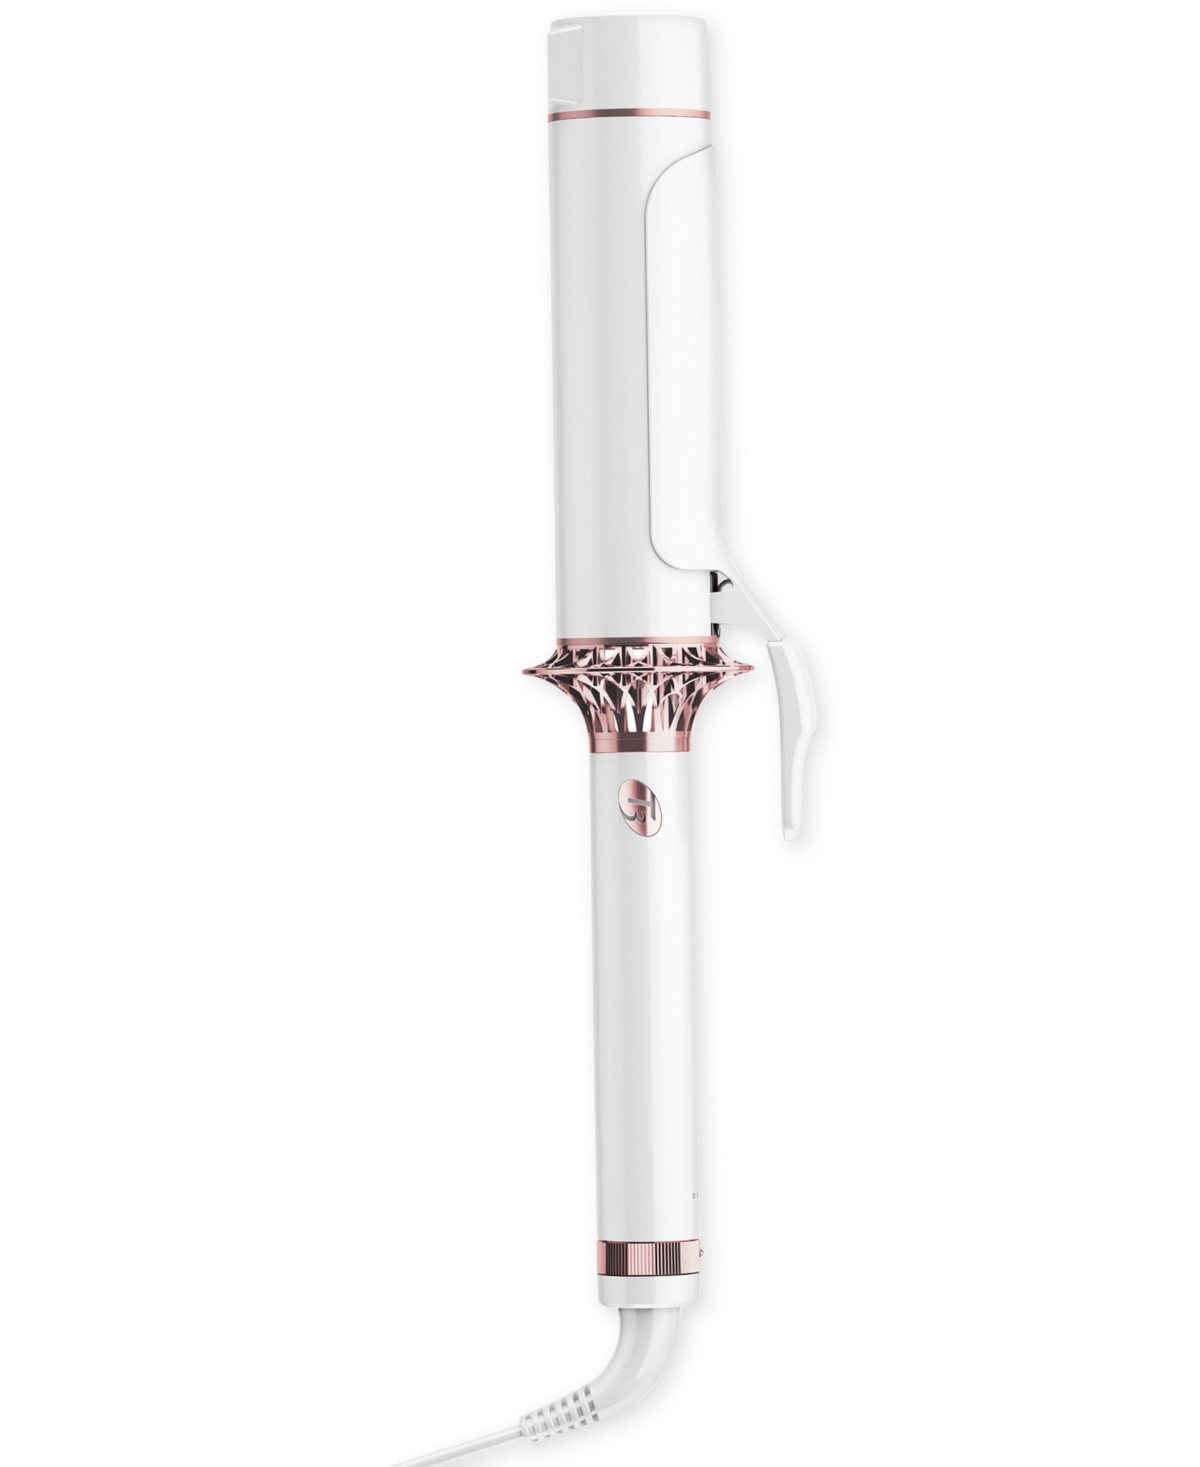 BodyWaver 1.75" Professional Ceramic Styling Iron for Waves and Volume (White & Rose Gold)